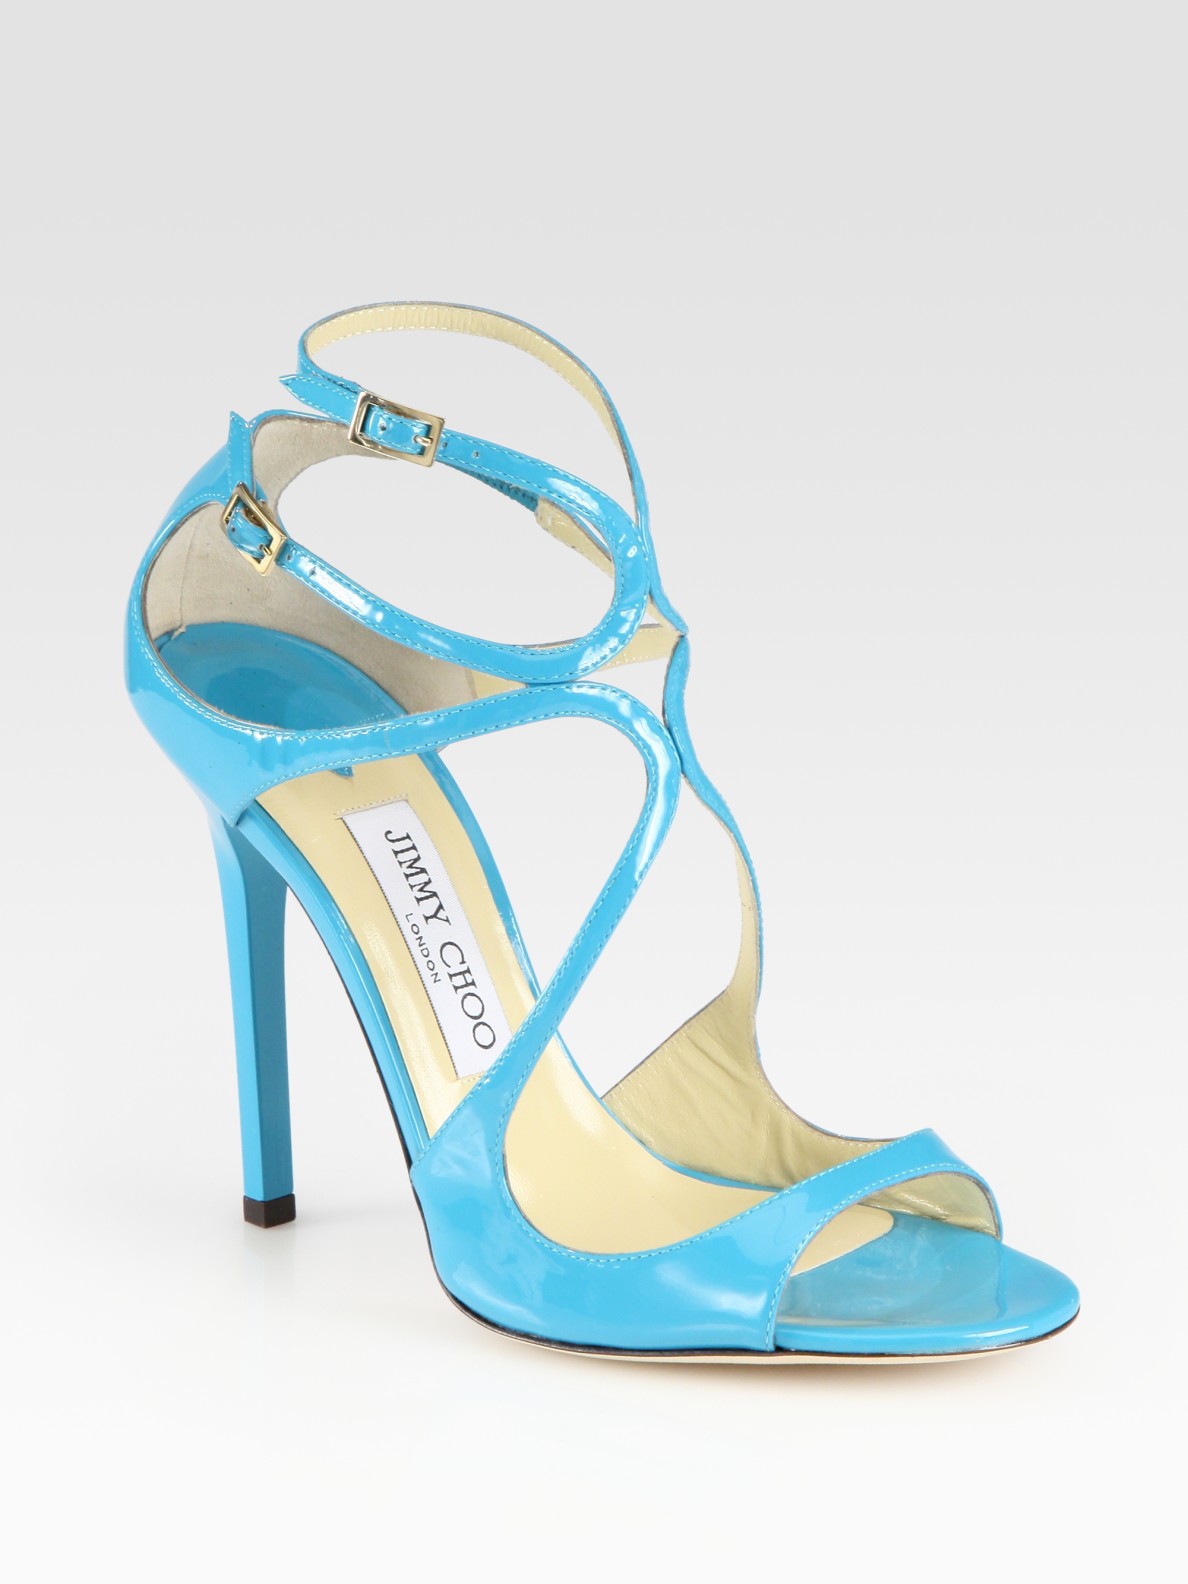 Jimmy Choo Lance Patent Leather Sandals in Turquoise (Blue) - Lyst